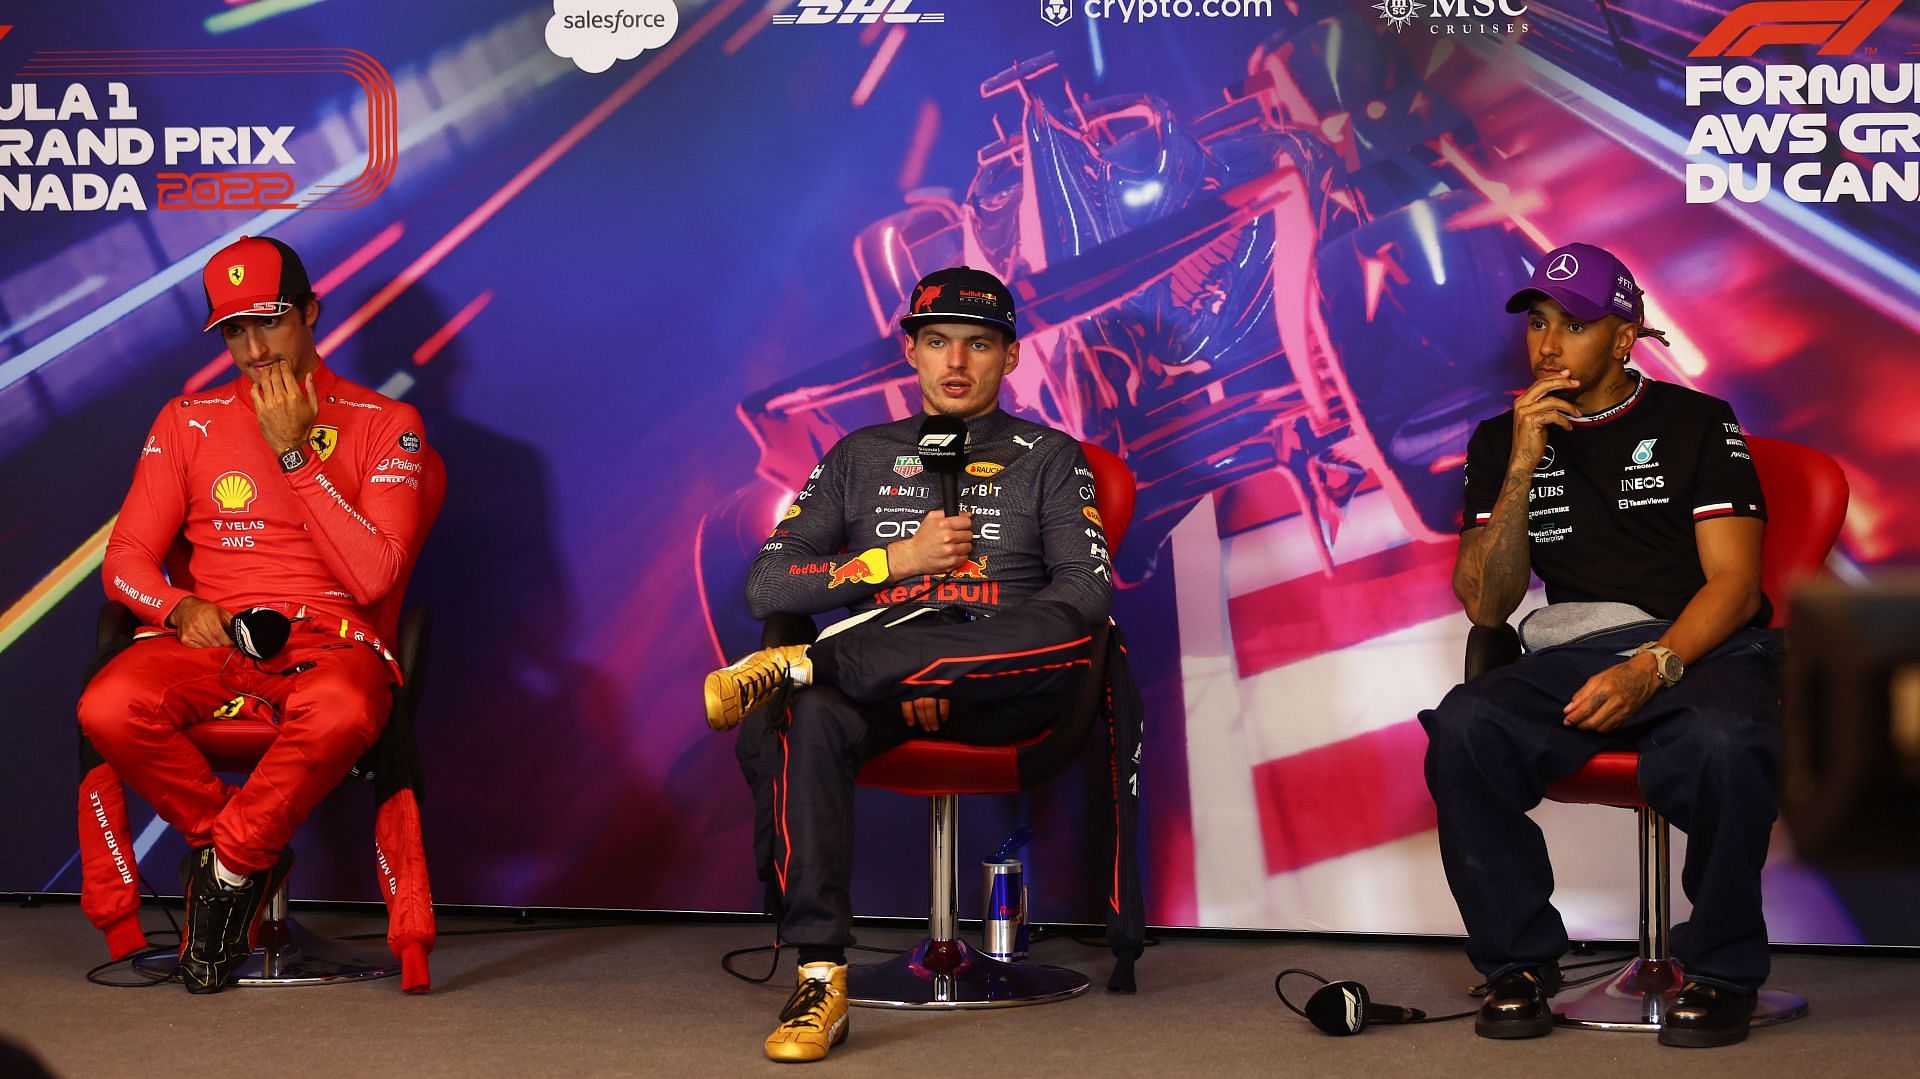 Post Race Press Conference at the F1 Grand Prix of Canada